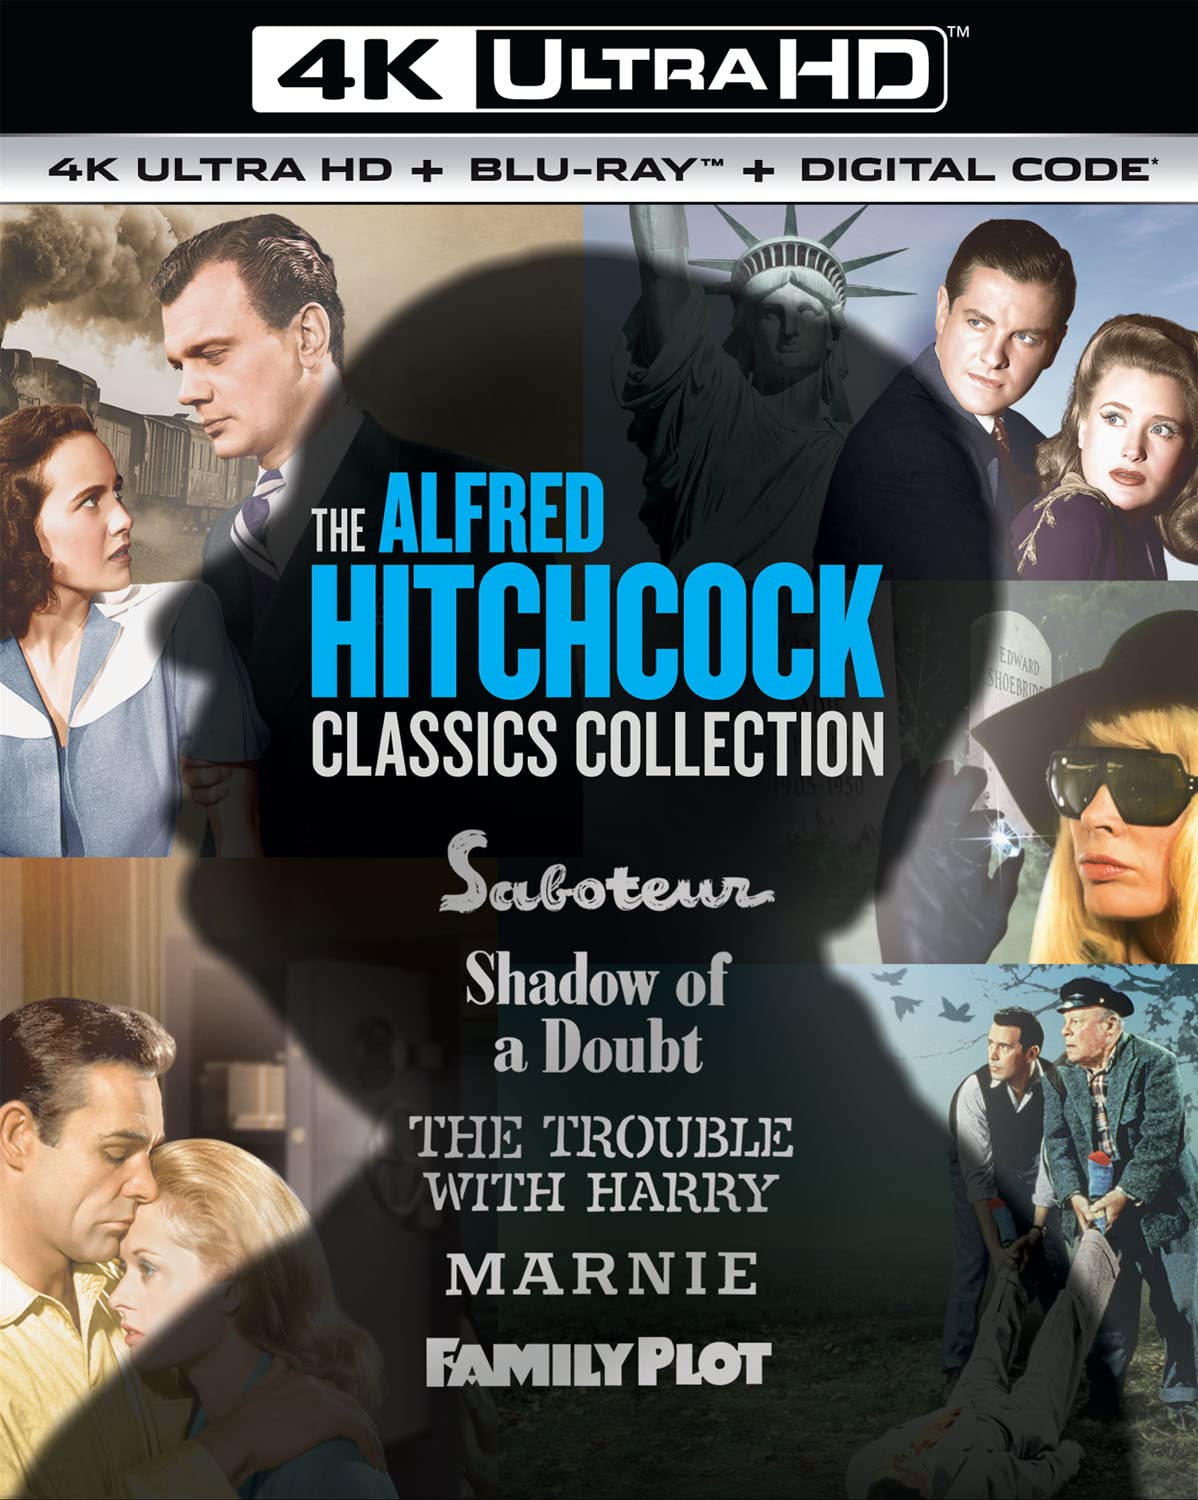 The Alfred Hitchcock Classics Collection 4k Blu-ray